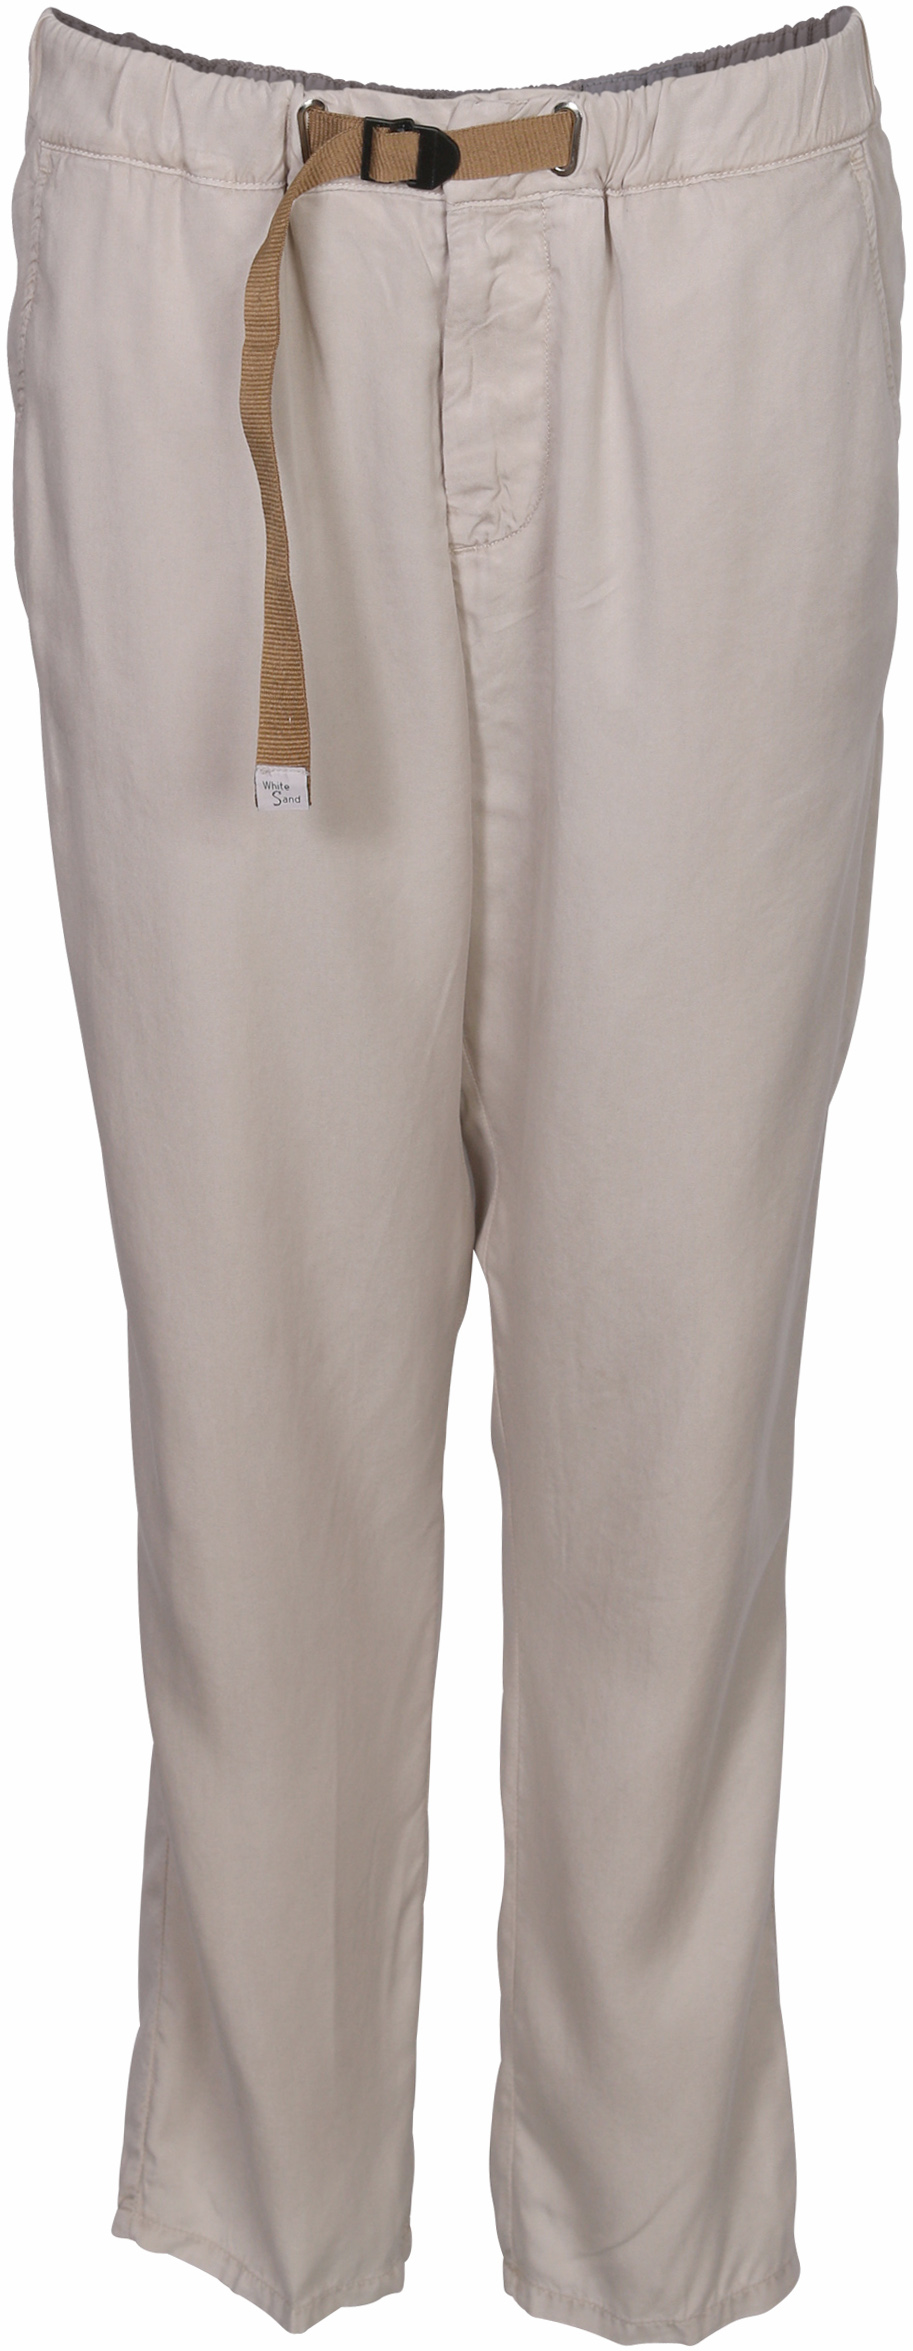 White Sand Chino Beige Washed 100% Lyocell